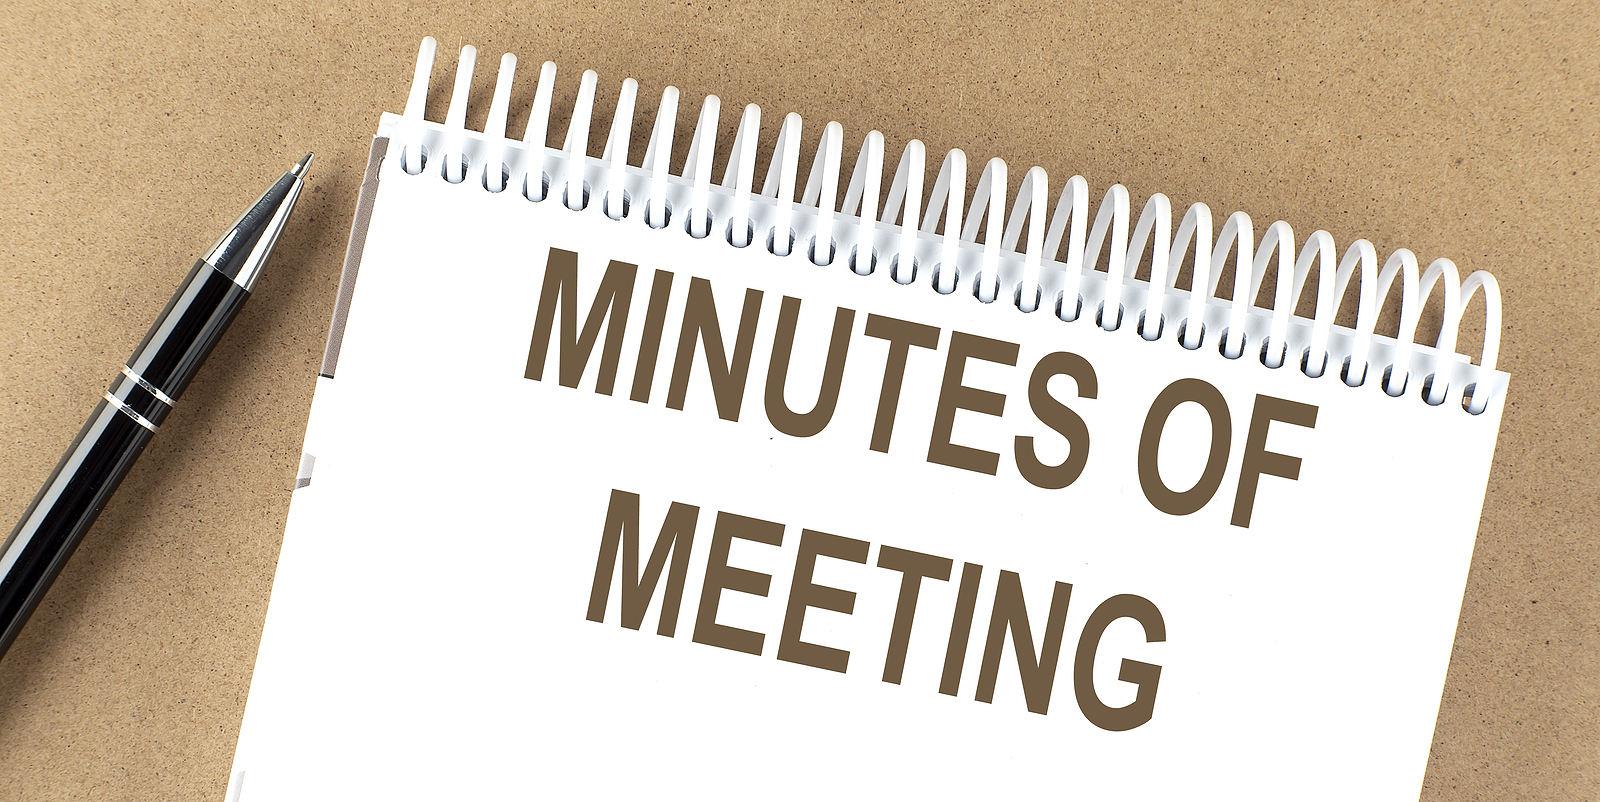 MINUTES OF MEETING text on notepad with pen, business concept